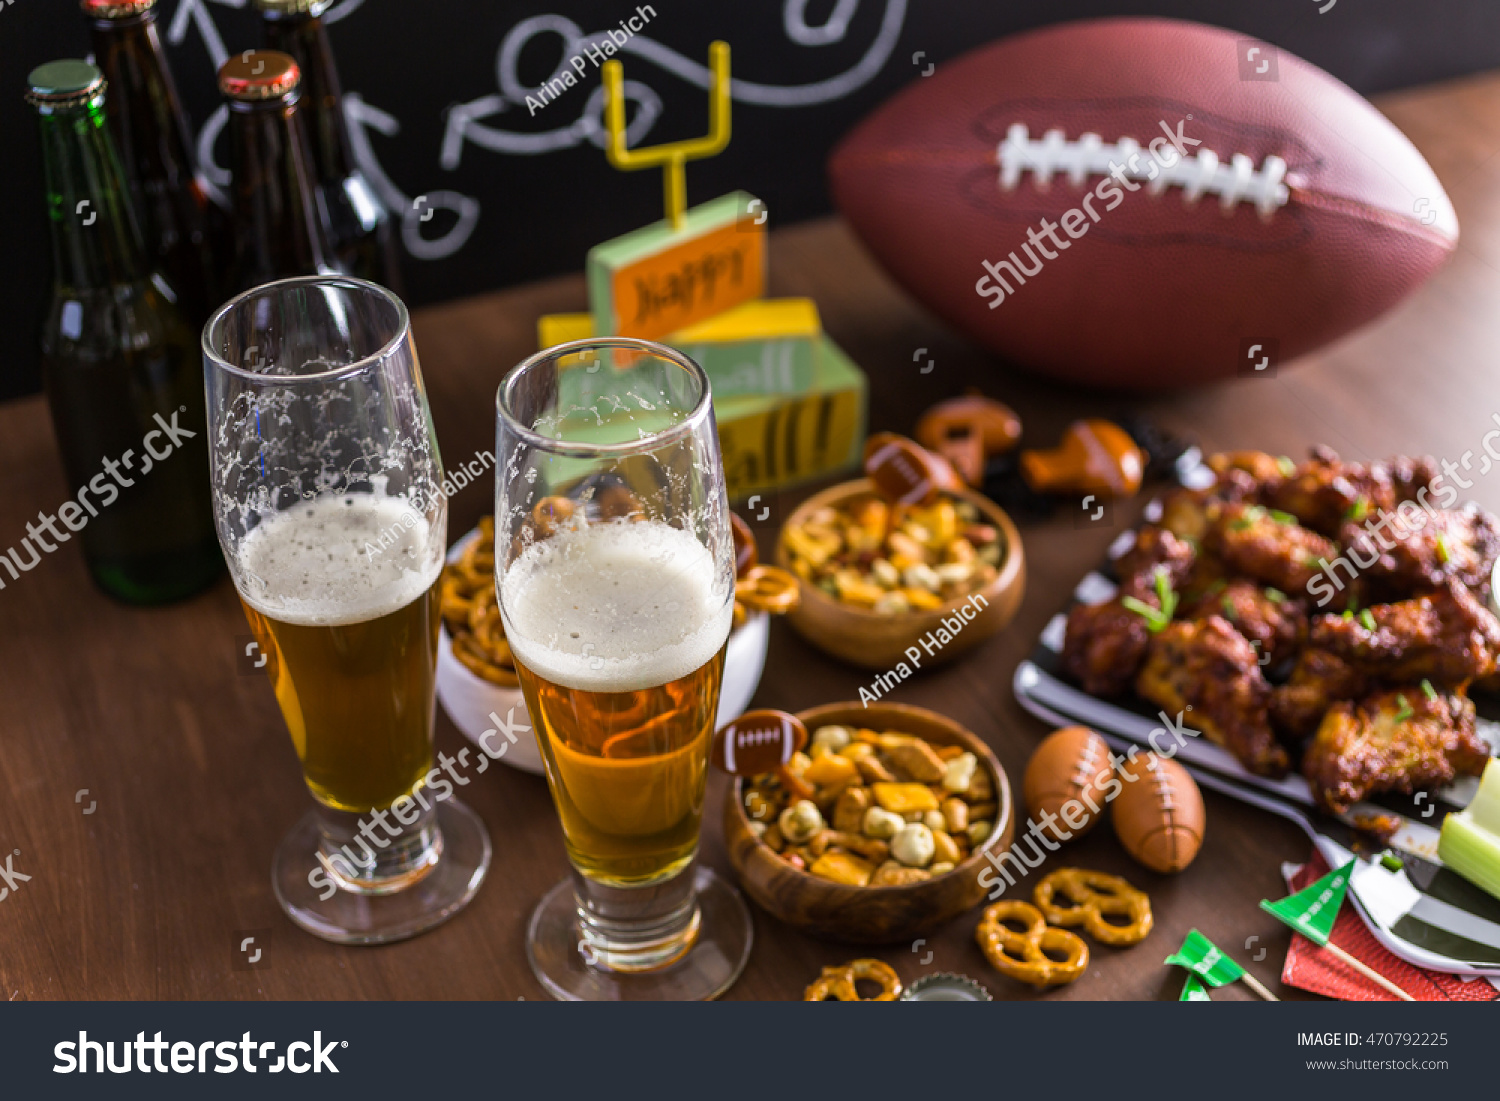 68,740 Alcohol american Images, Stock Photos & Vectors | Shutterstock